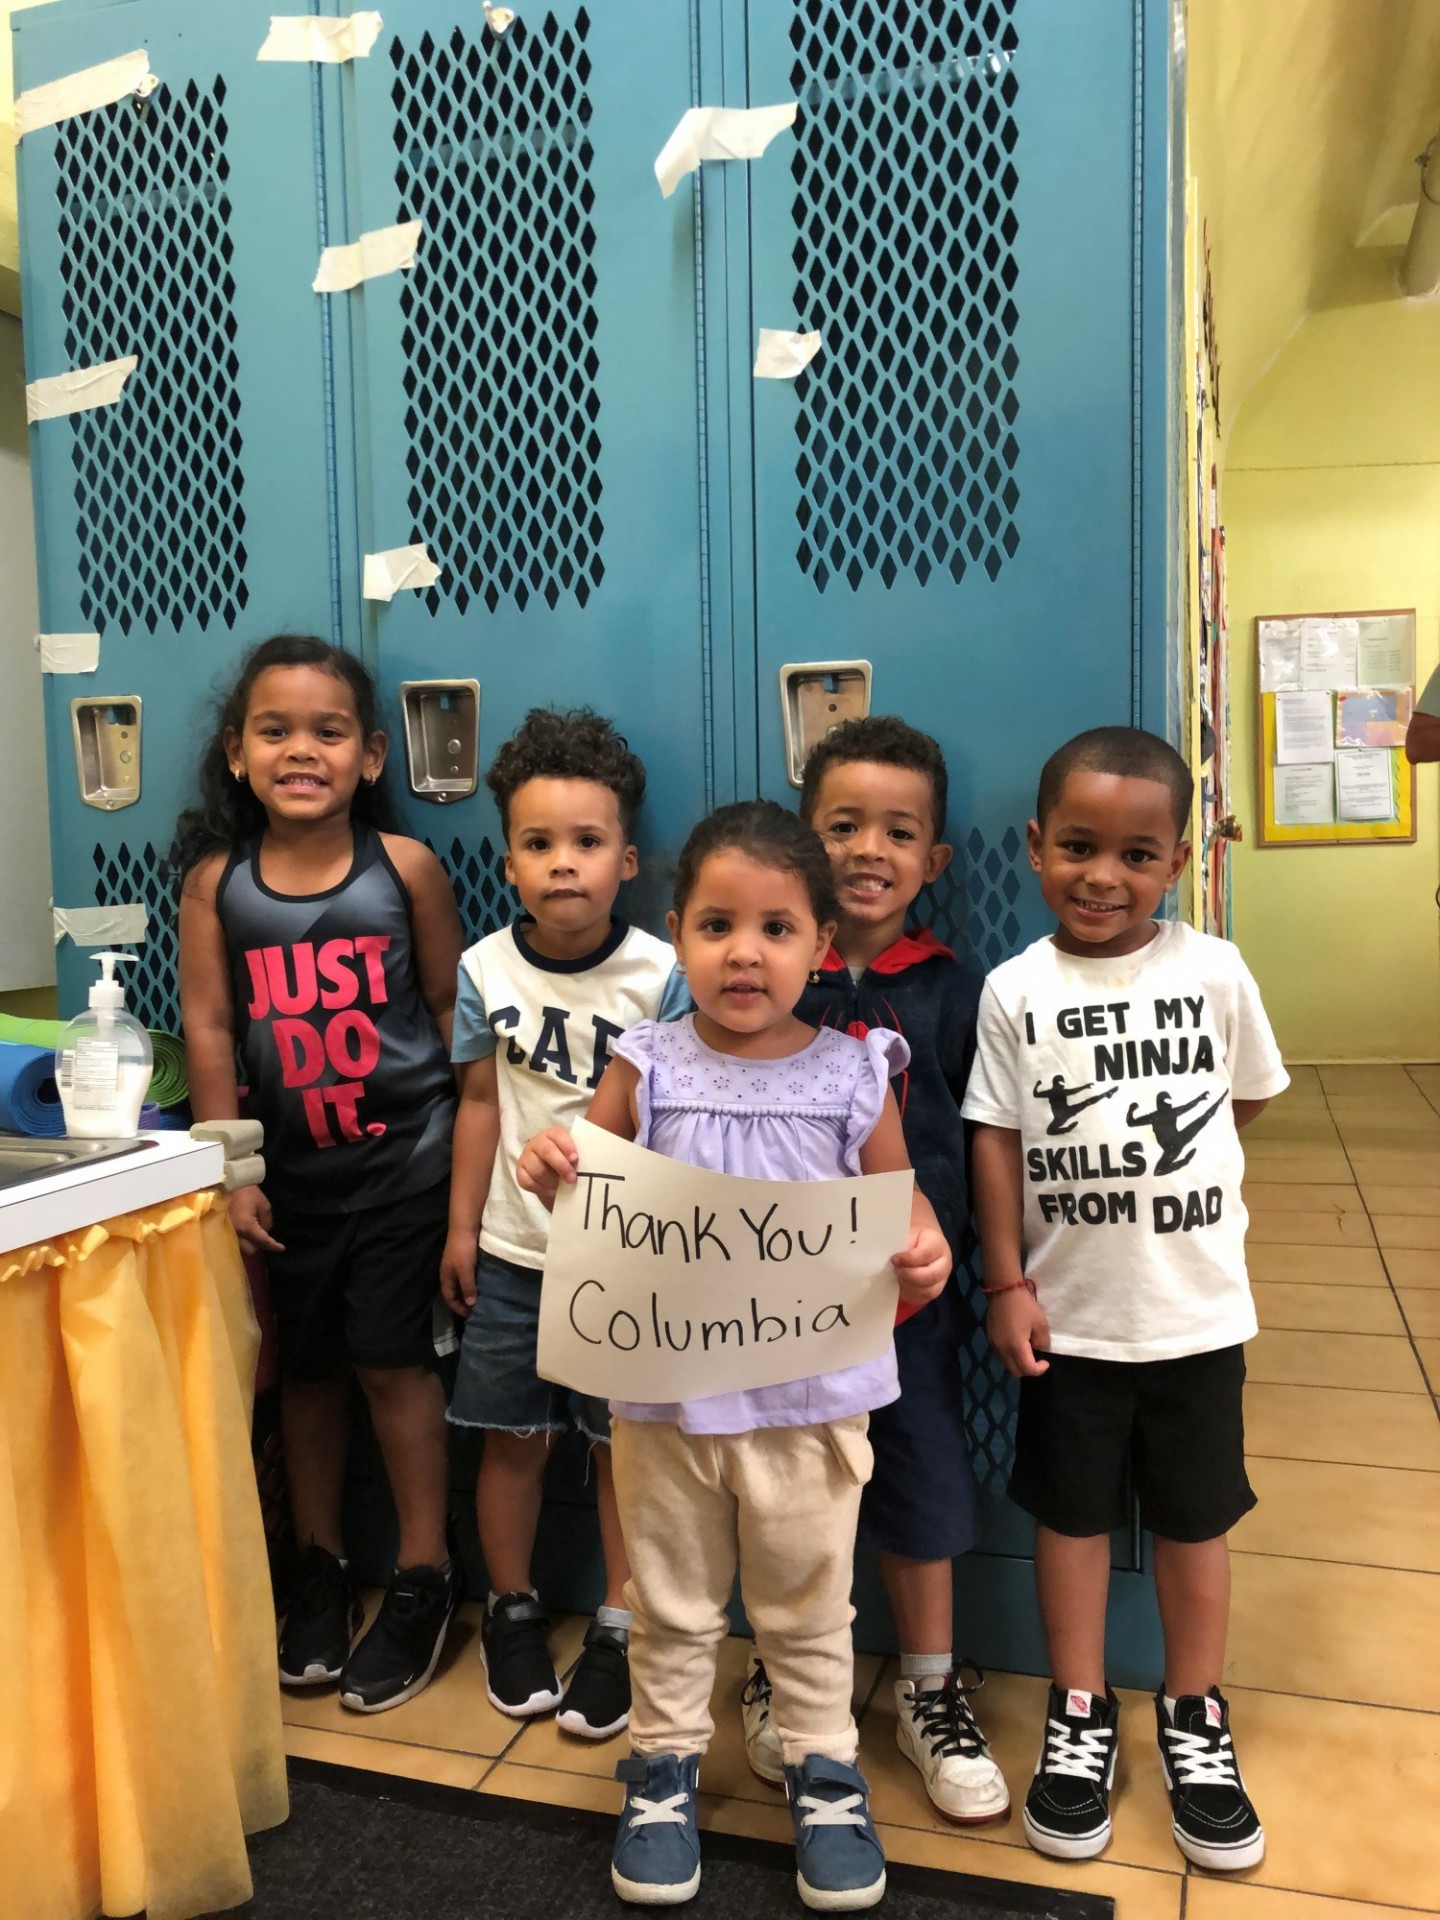 Washington Heights Child Care Center members in front of the donated lockers. From left: Keylee Martinez, Angel Matteo Recio, Charlotte Coenao, Aiden Espinal, Artdy Hernandez